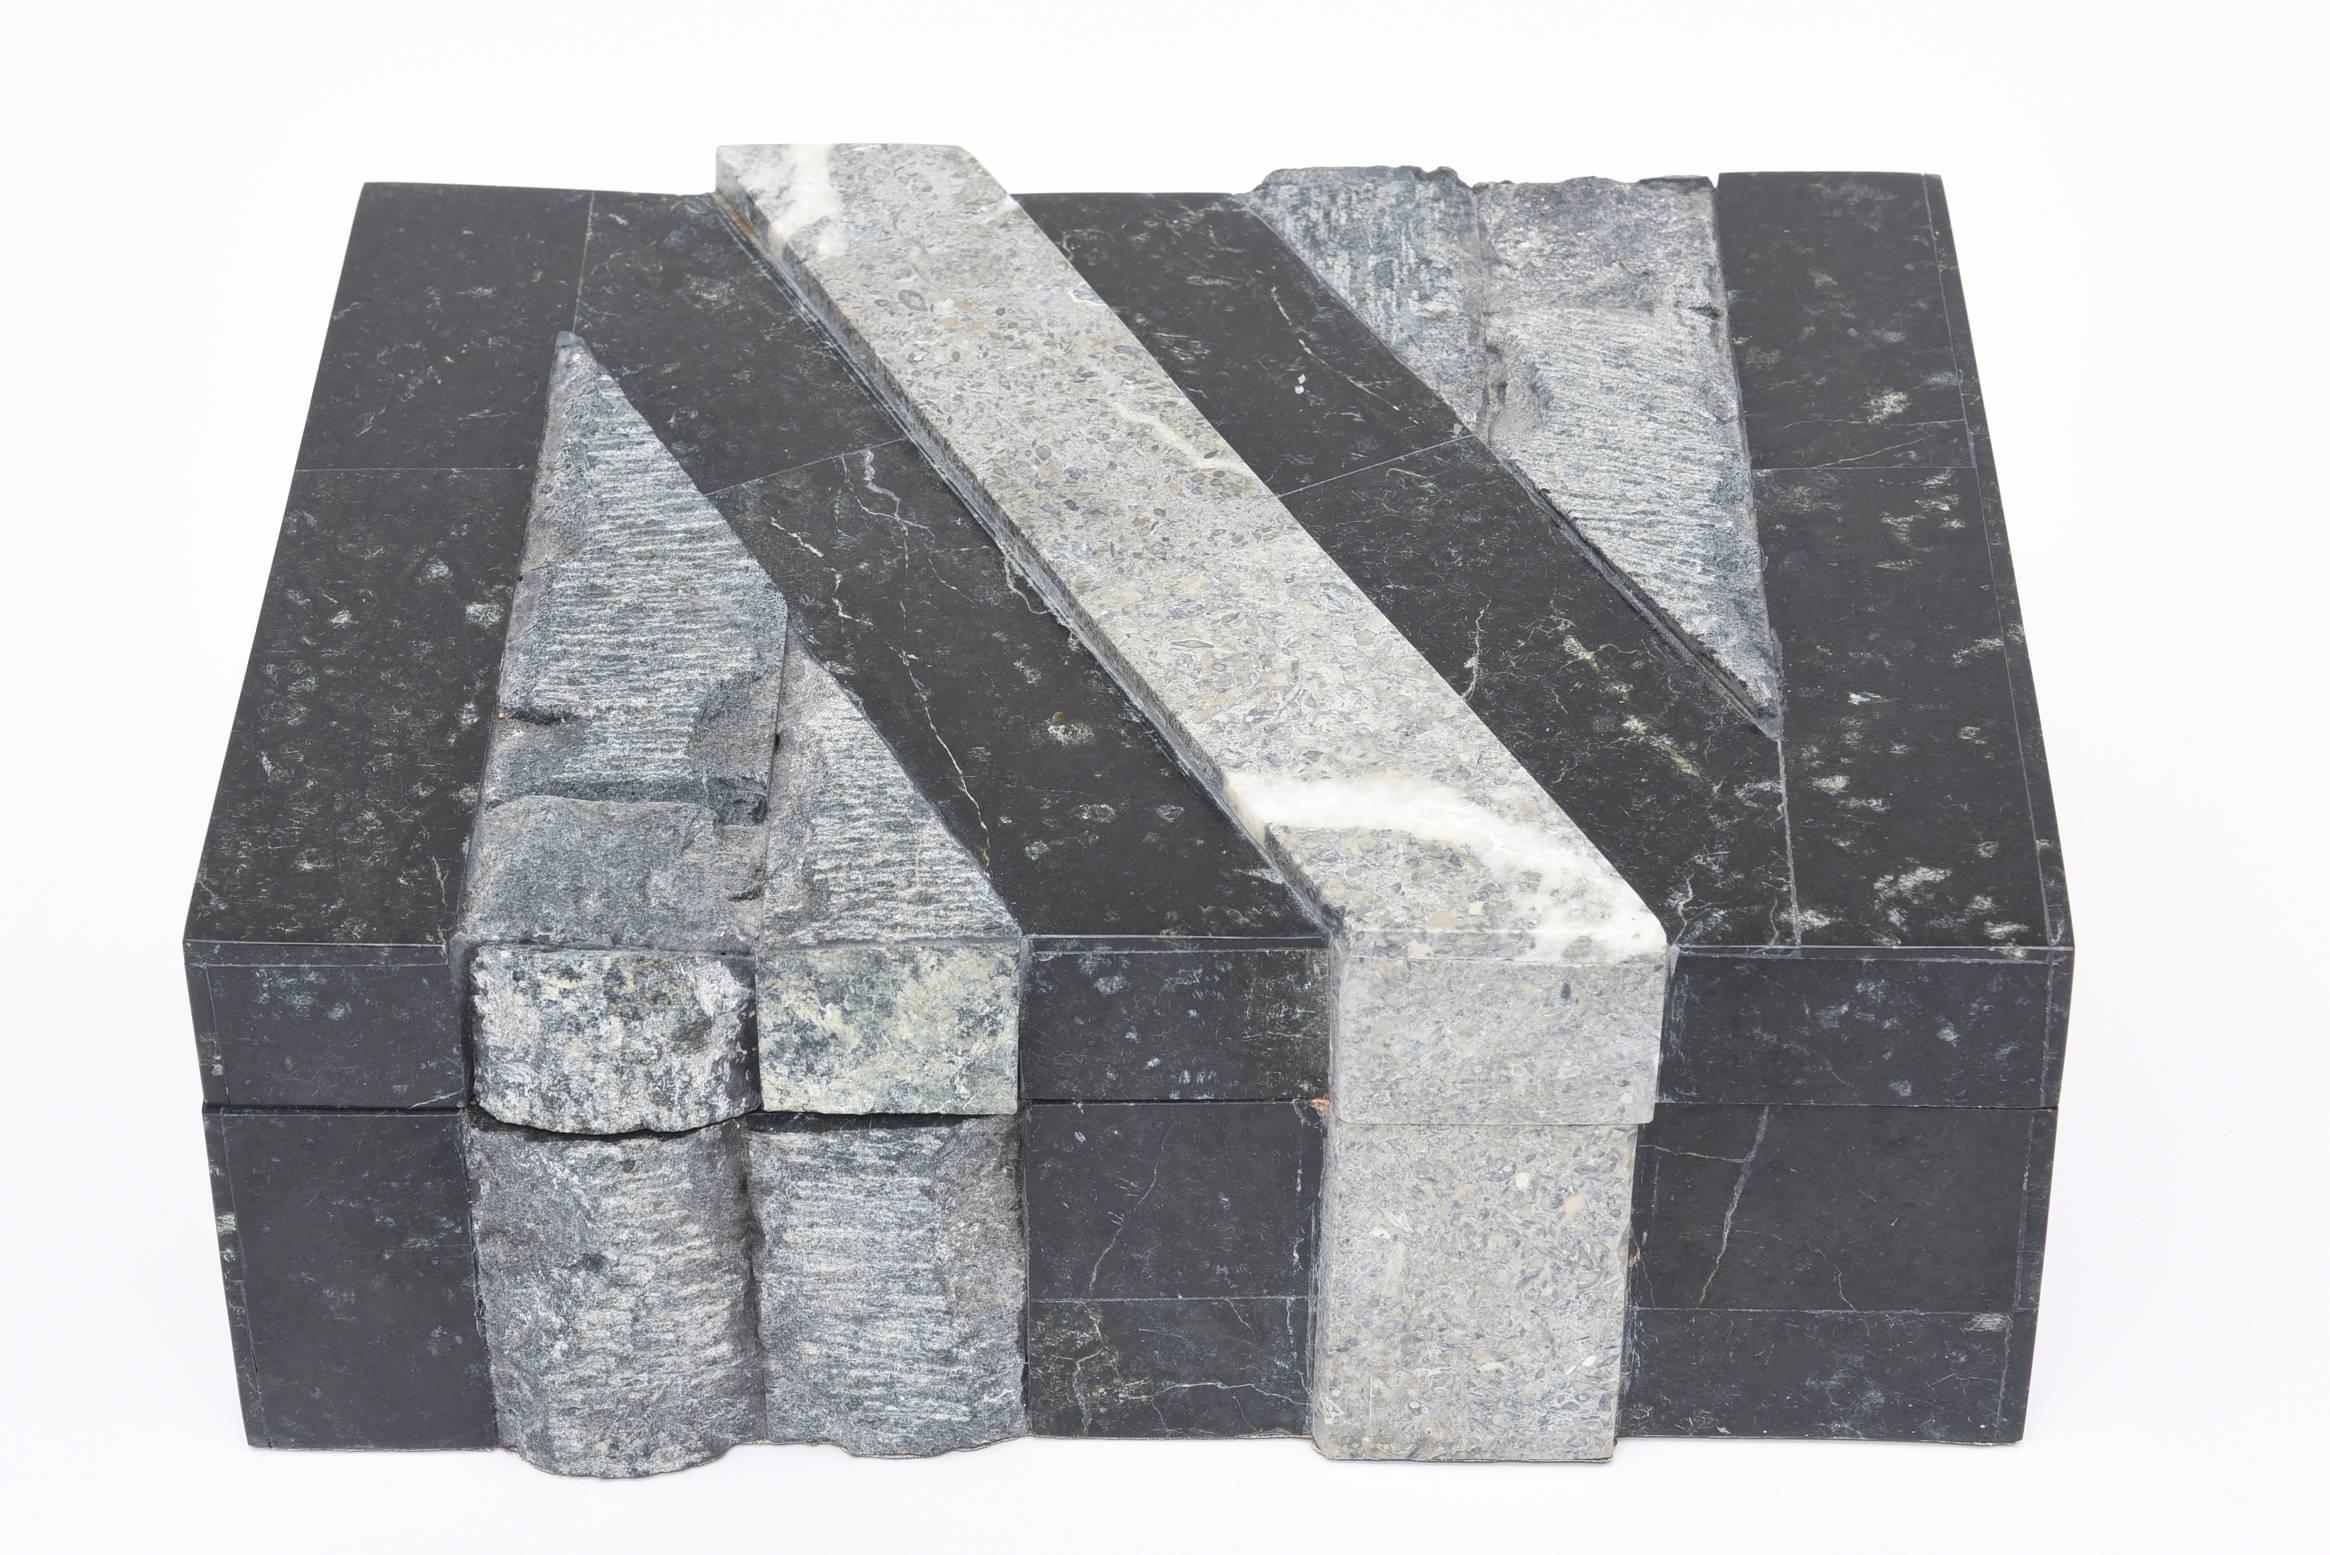 This handsome box comprising of both the yin and the yang of polished and rough stone is quite sculptural.
It has dimension, texture, and a great look. The stone protrudes and is angled and creates lines.
Greys and black play well together with